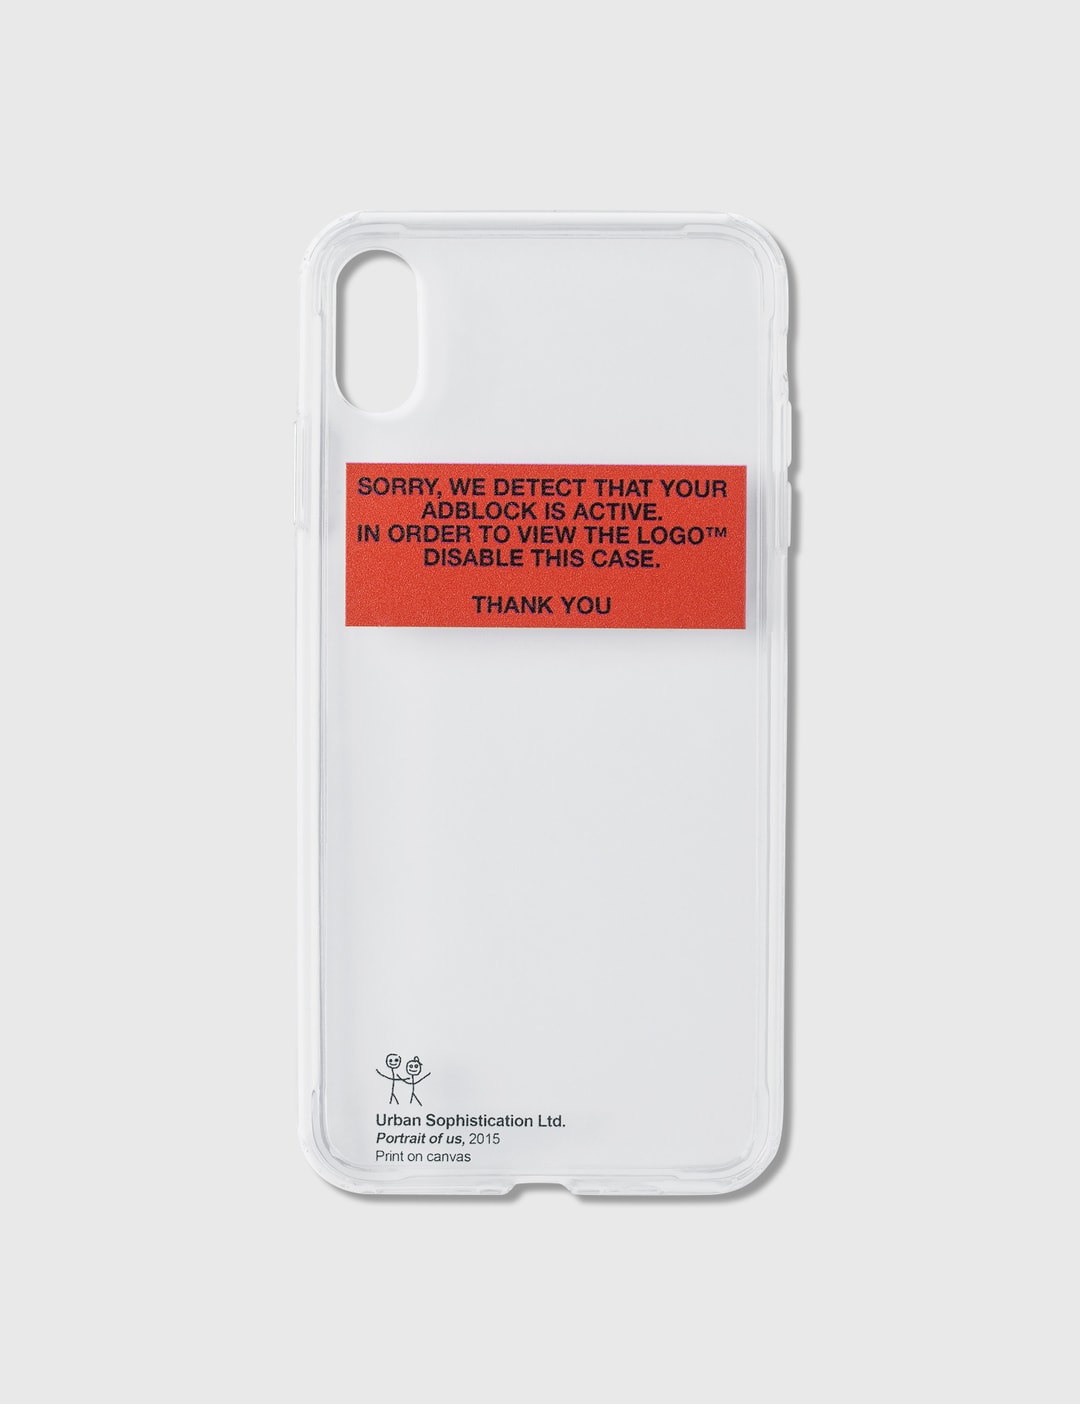 Urban Sophistication - Adblock Iphone Cover | HBX - Globally Curated ...